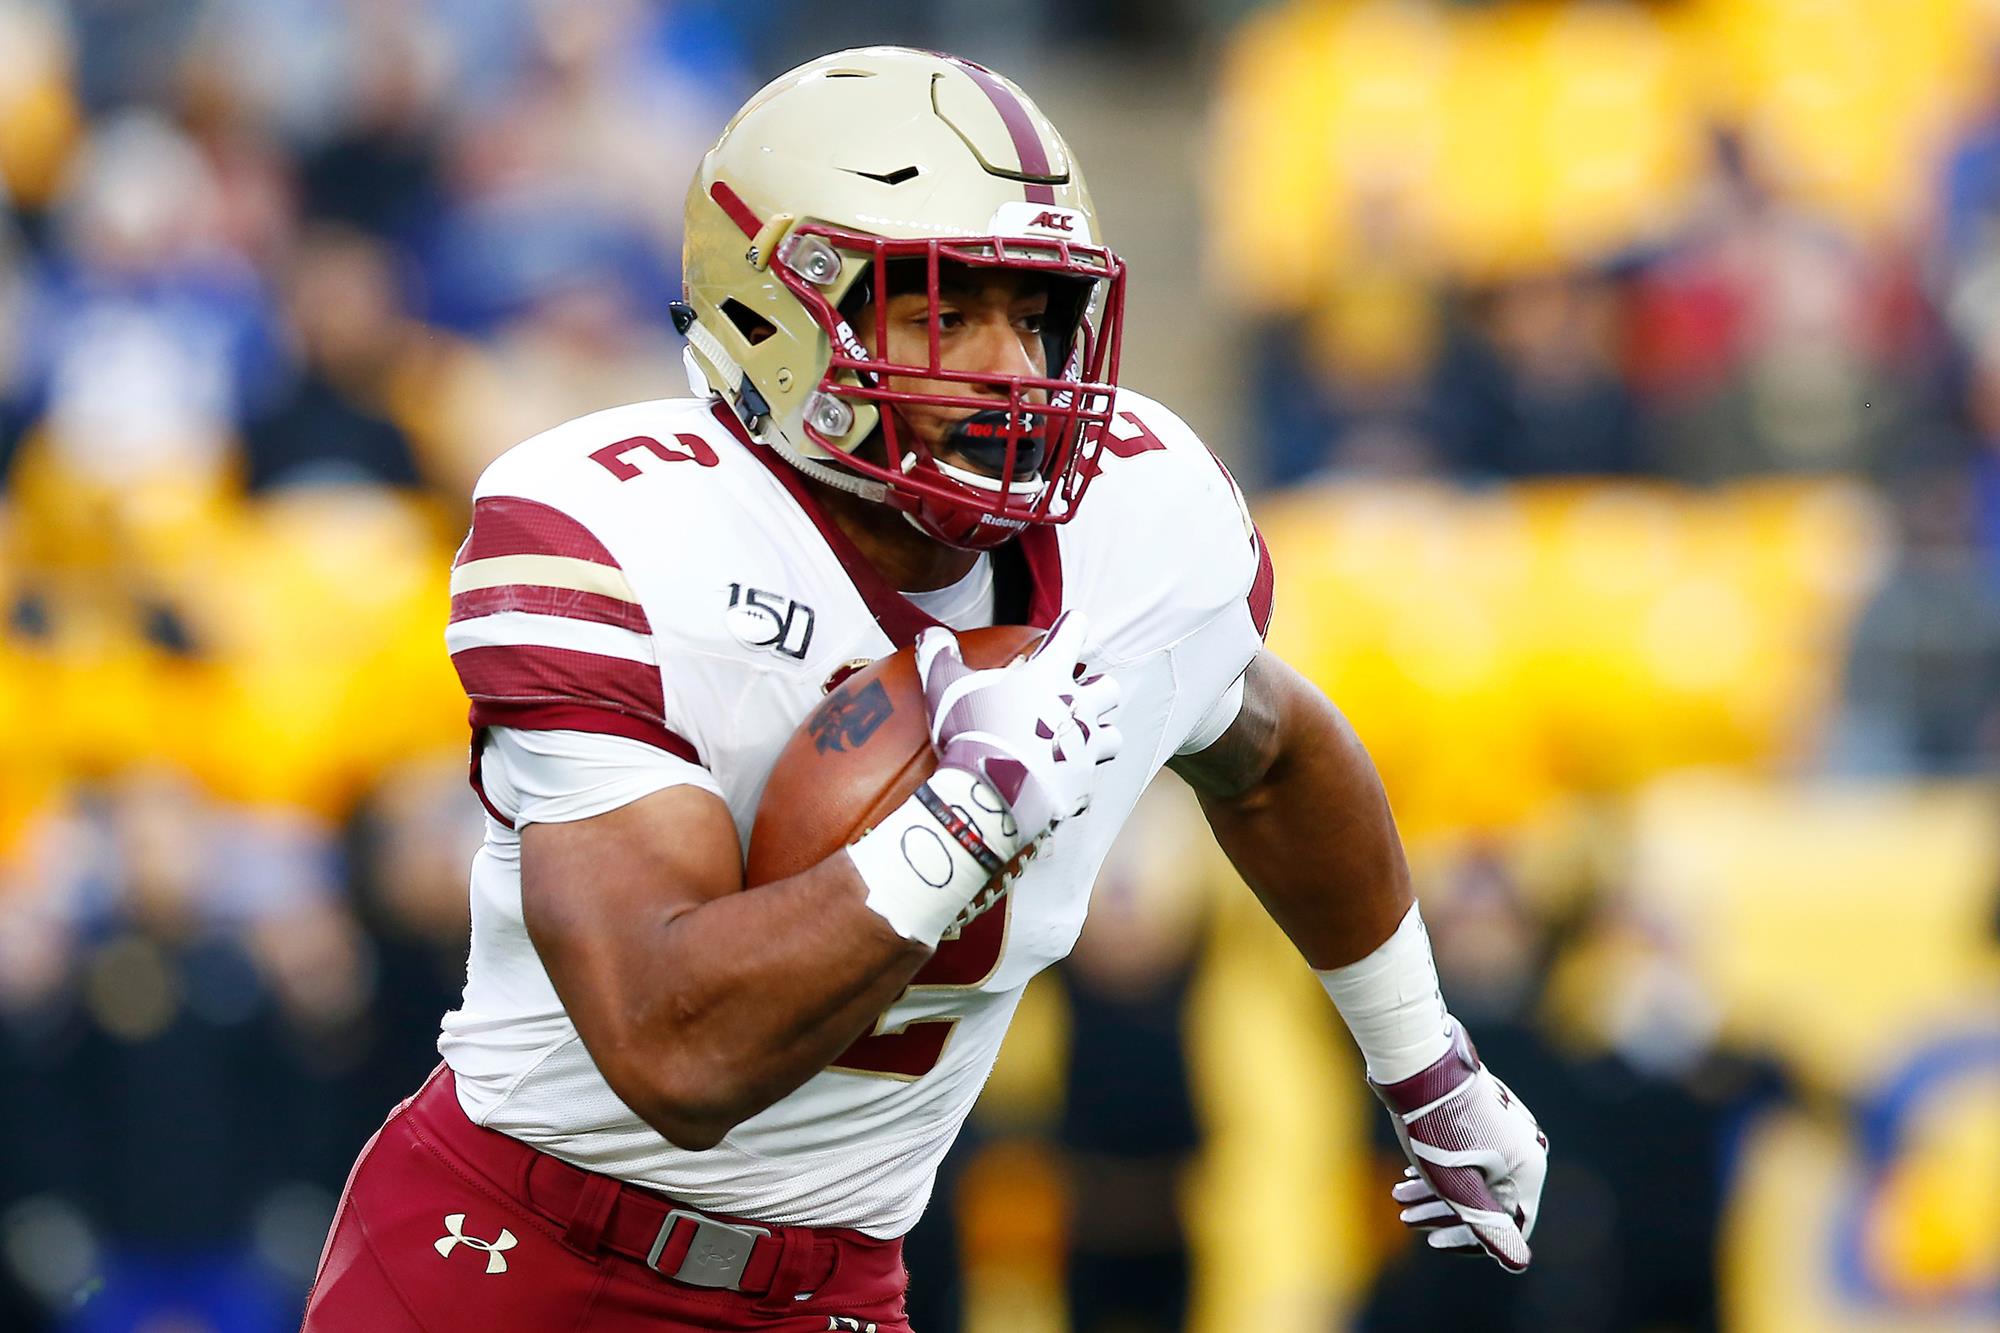 Boston College's A.J. Dillon may just be this year's most...